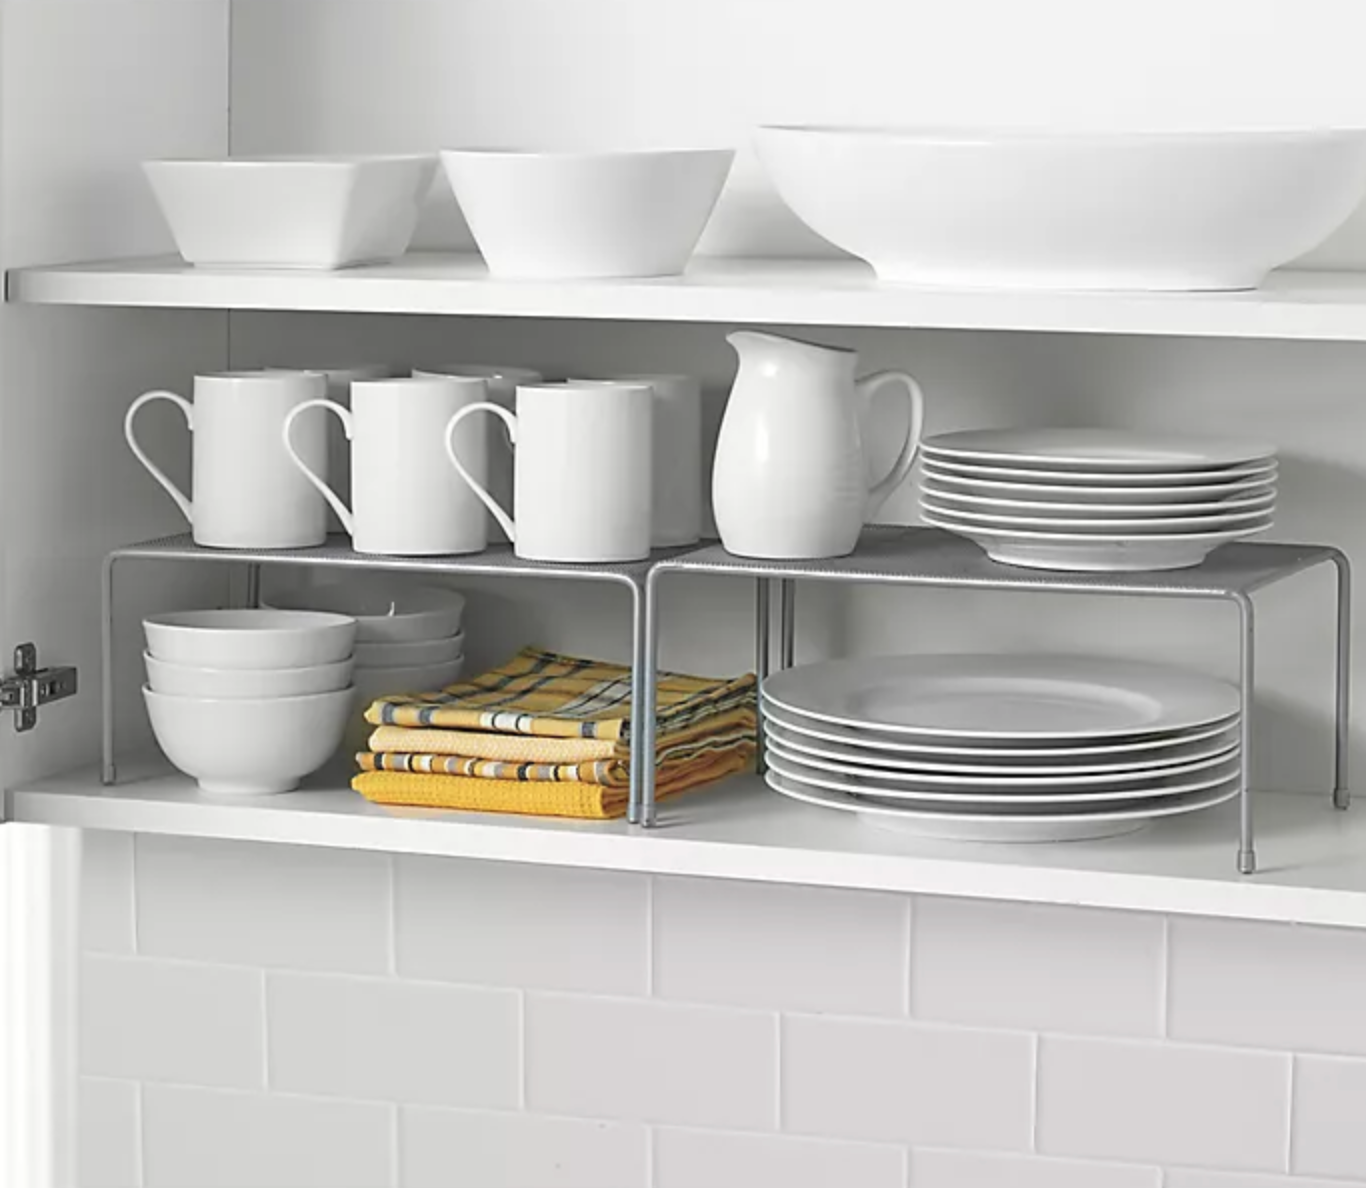 9 Kitchen Organizers Under $25 That Will Free Up Coveted Cabinet